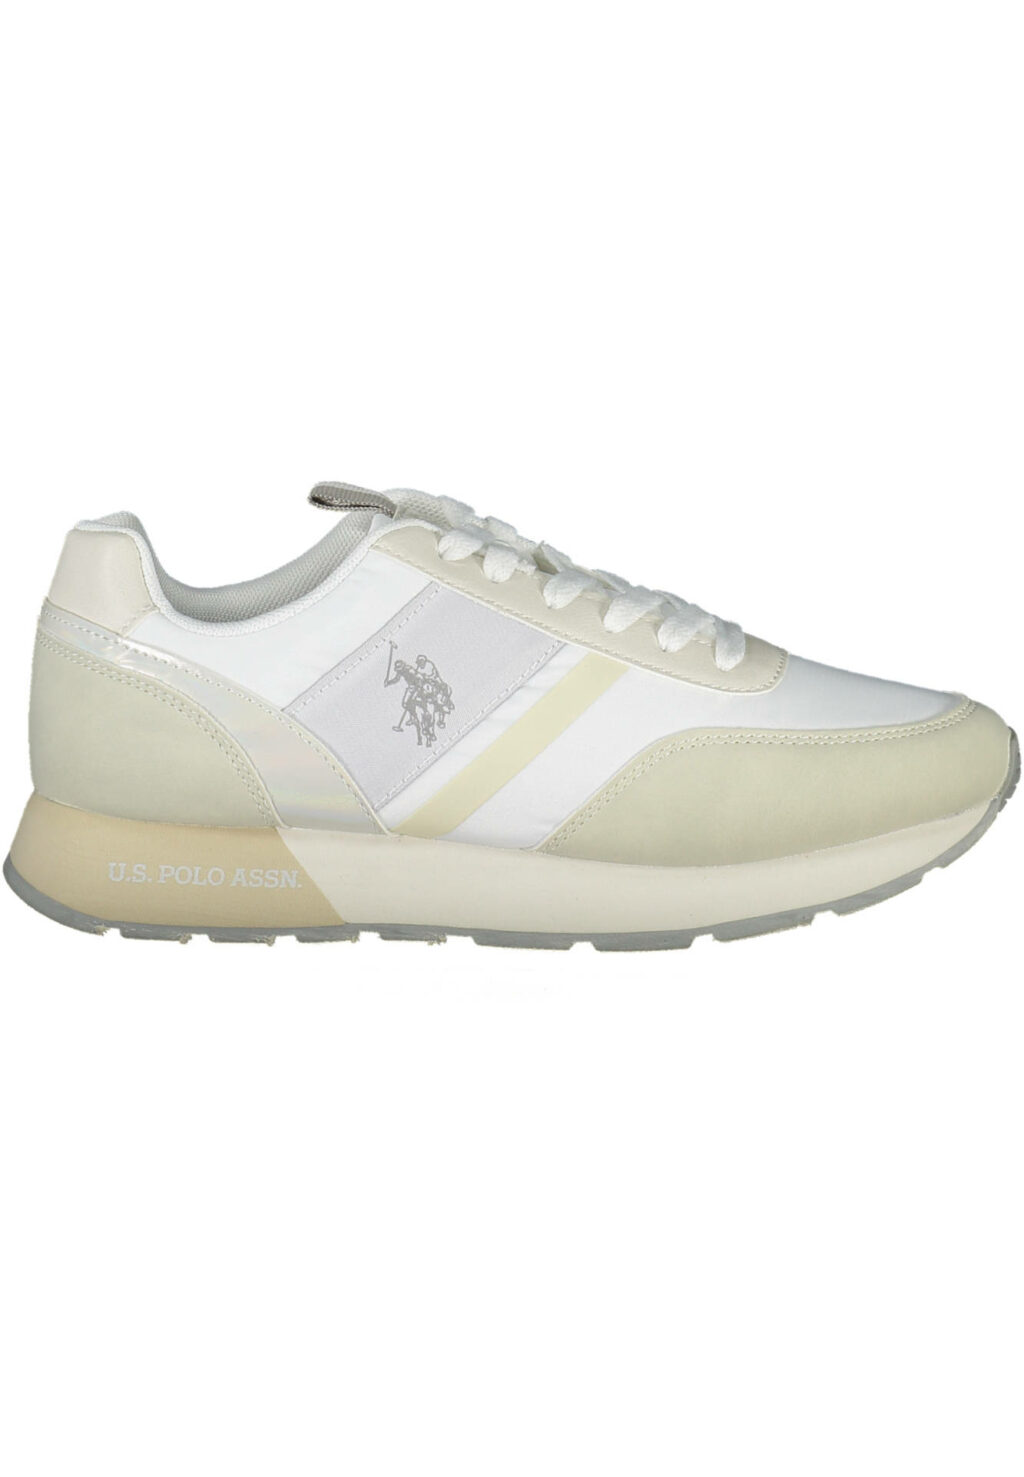 US POLO BEST PRICE WHITE WOMEN'S SPORT SHOES NOBIW002W3NH1_BIANCO_WHI